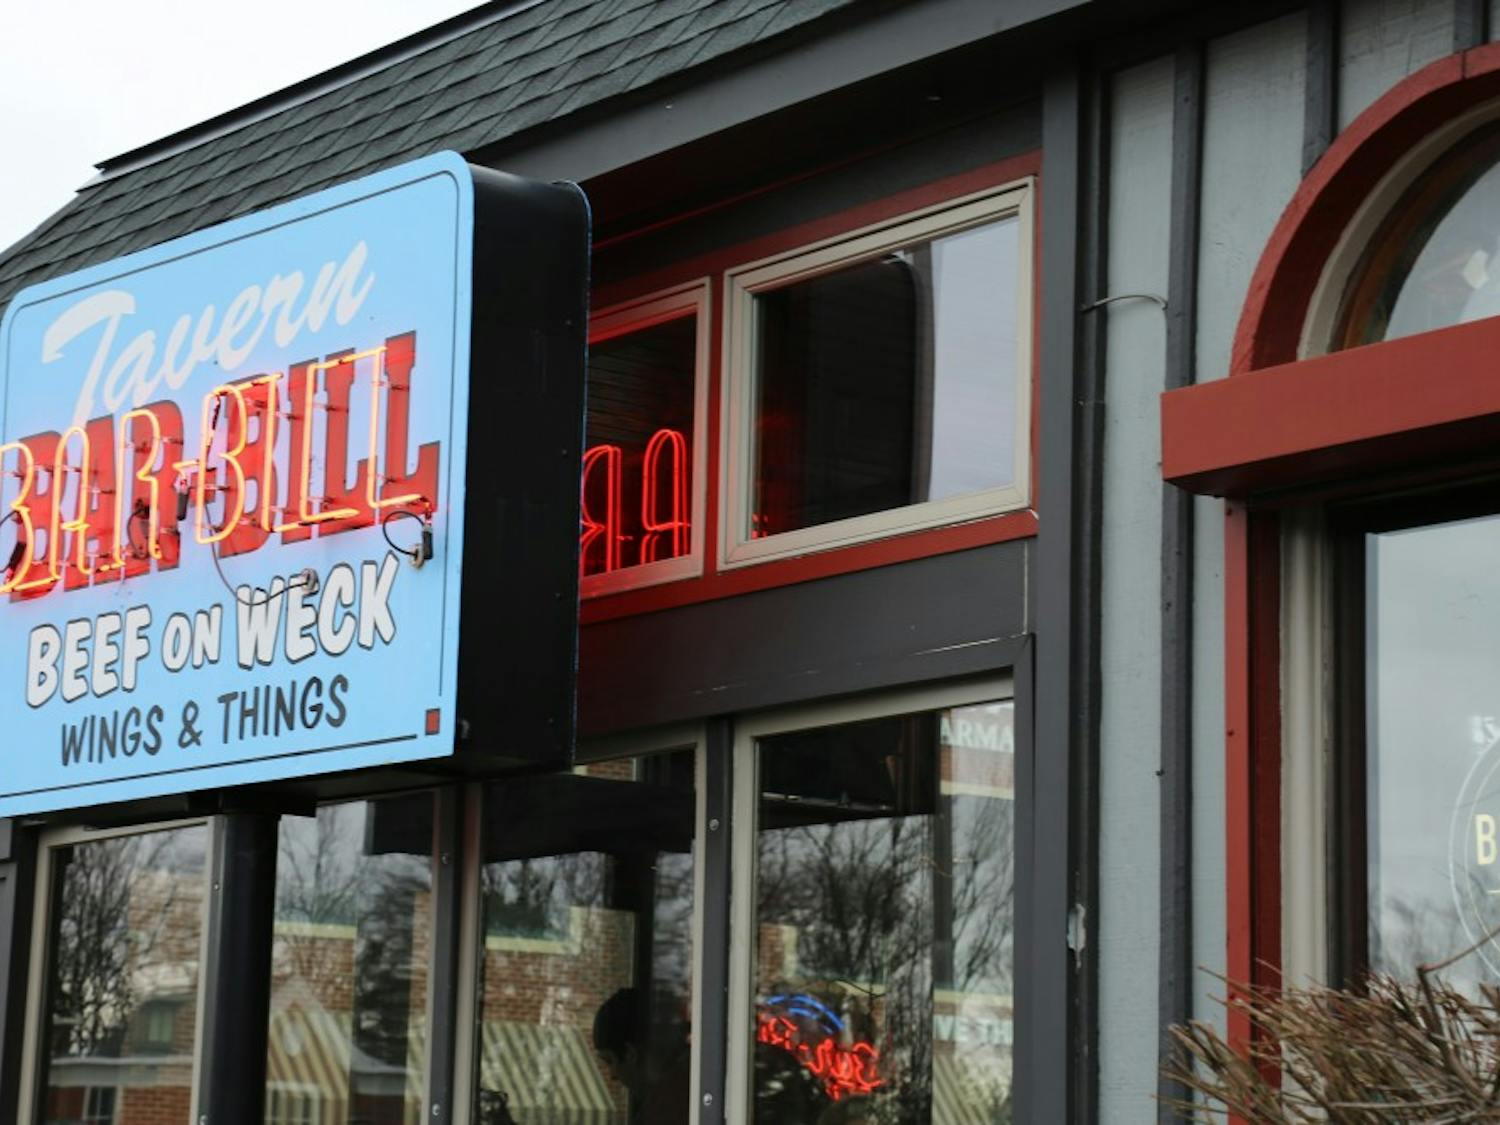 The Bar Bill stands as a local favorite when it comes to wings. It’s one of Buffalo’s most characteristic restaurants.